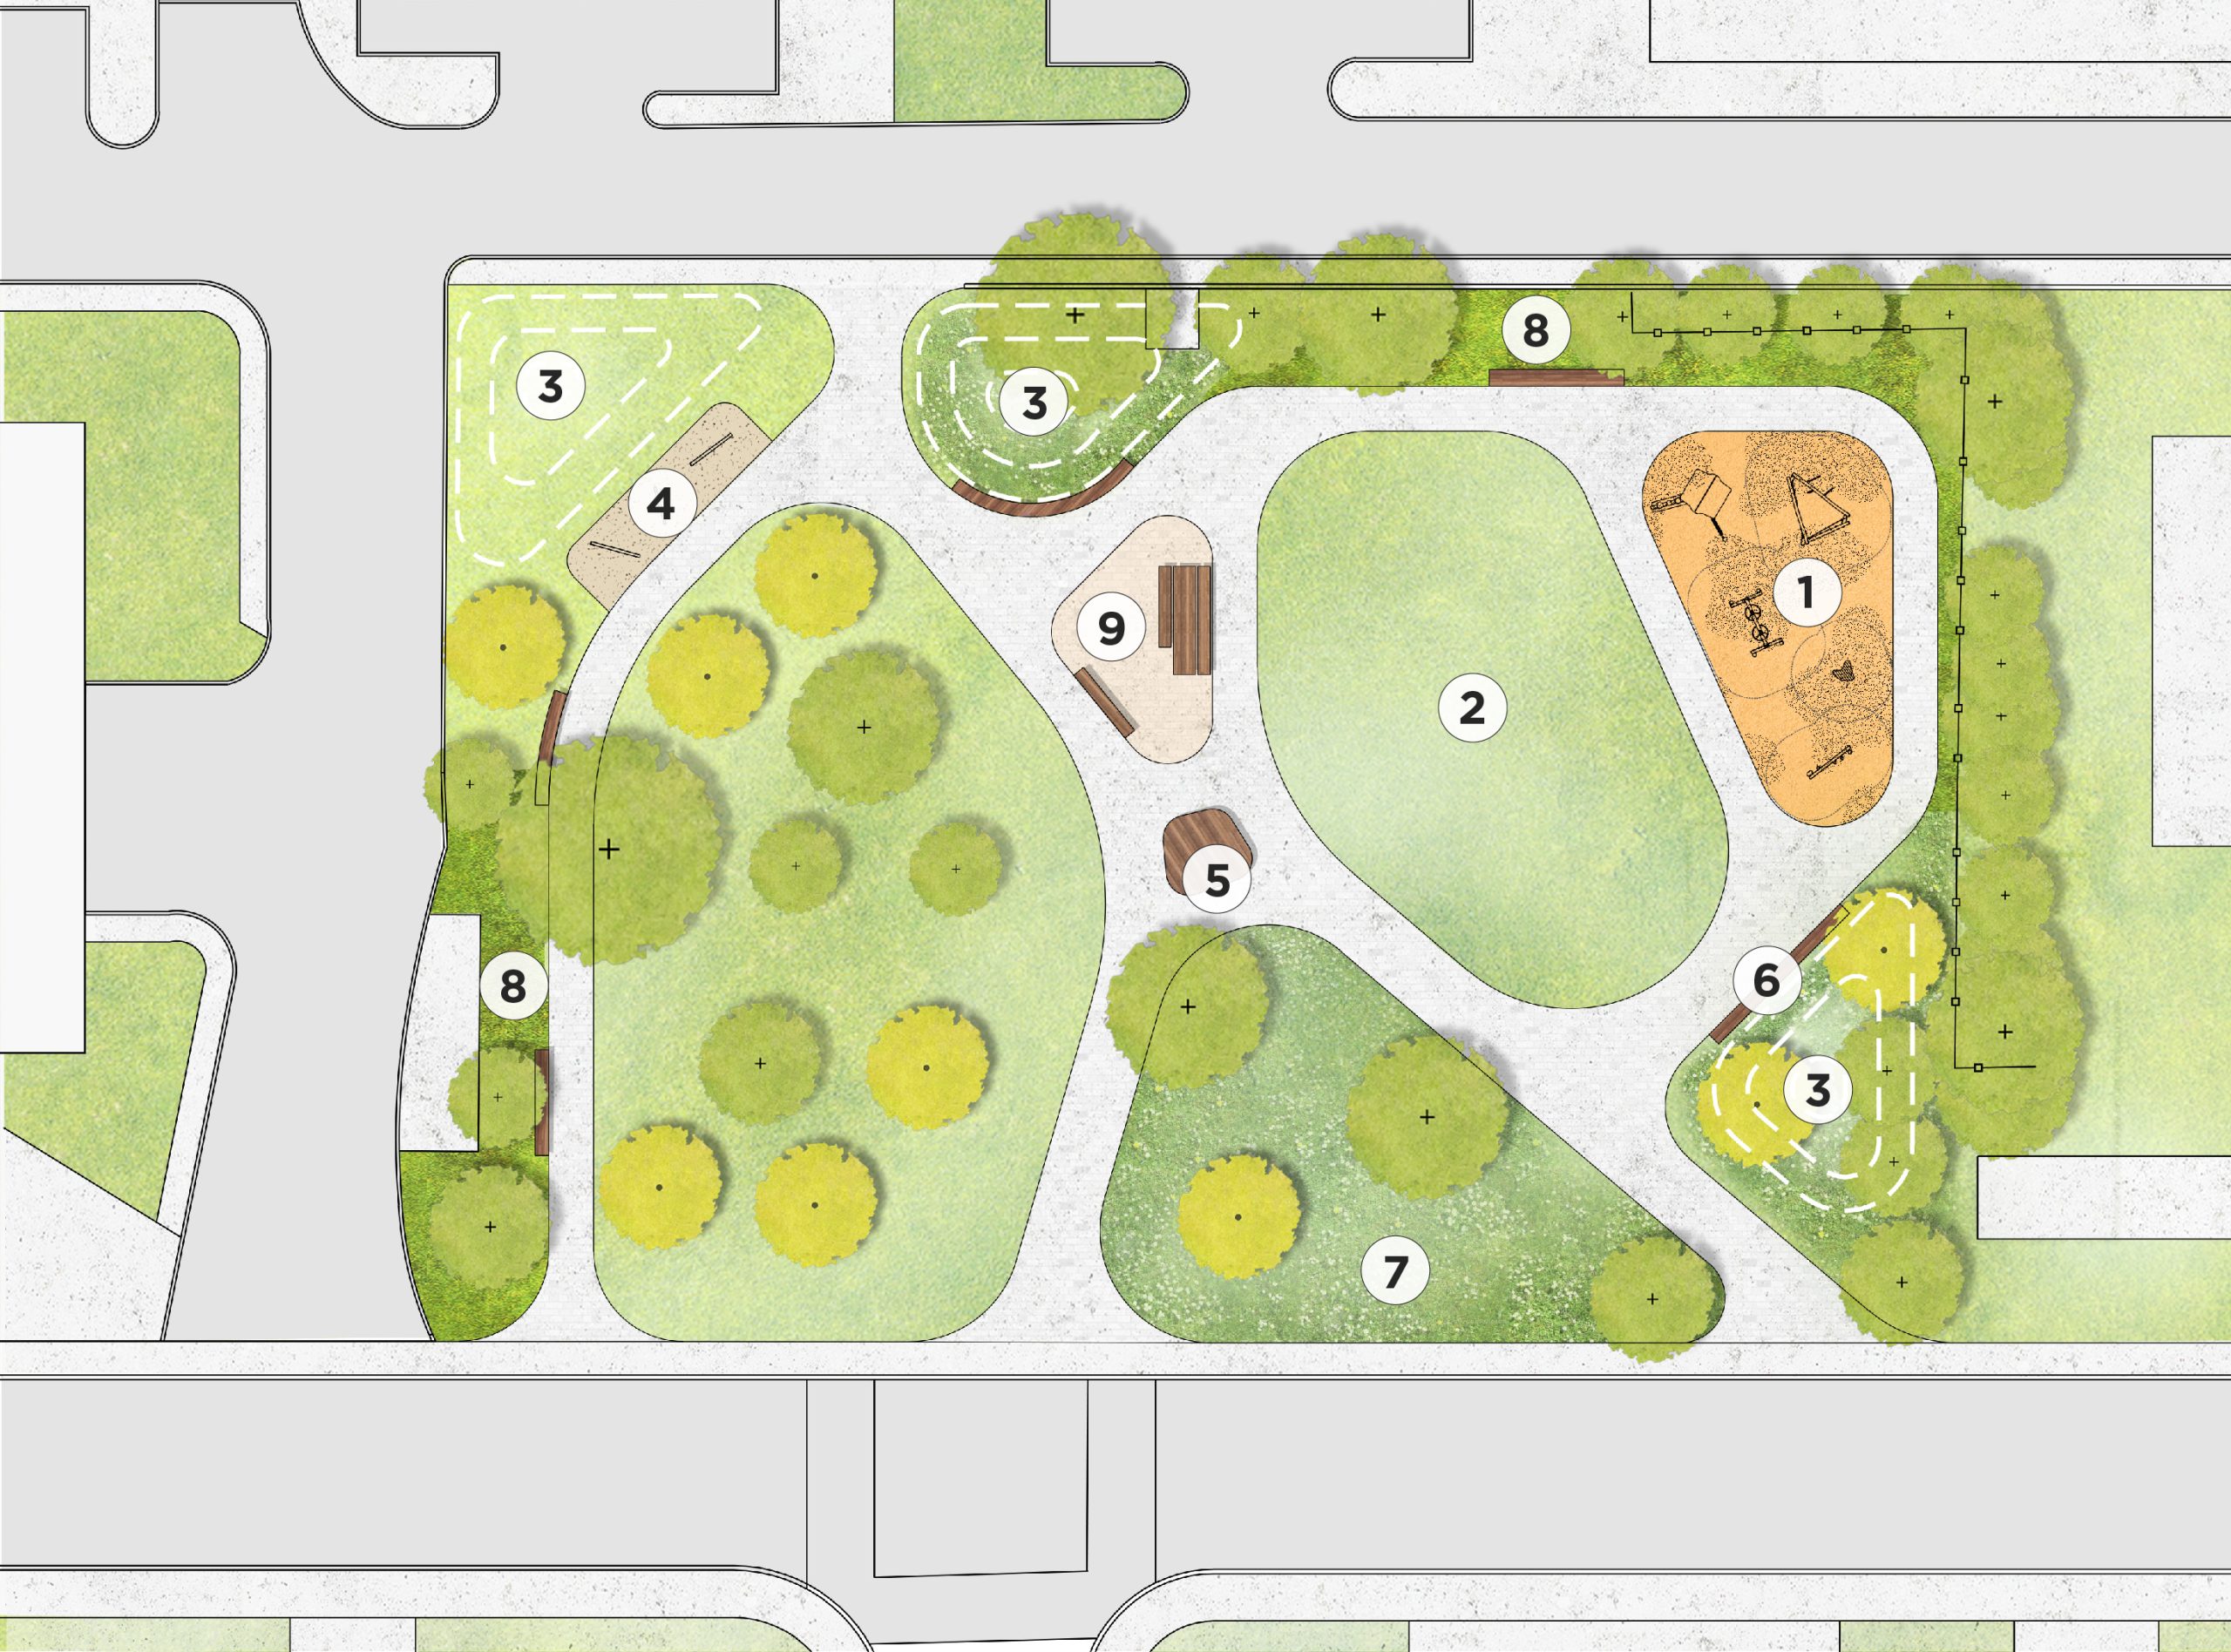 Aerial view of the design option for the parkette, with the main park entrance from Erskine Avenue where multiple defined pathways lead to activity areas. From the bottom left corner to top right corner, there is a meadow with landforms, benches, shrubs and greases around the west and north perimeter of the park, platform seating and a picnic area near the centre adjacent to the open lawn area, fitness equipment at the west, and playground at the top east section of the parkette.